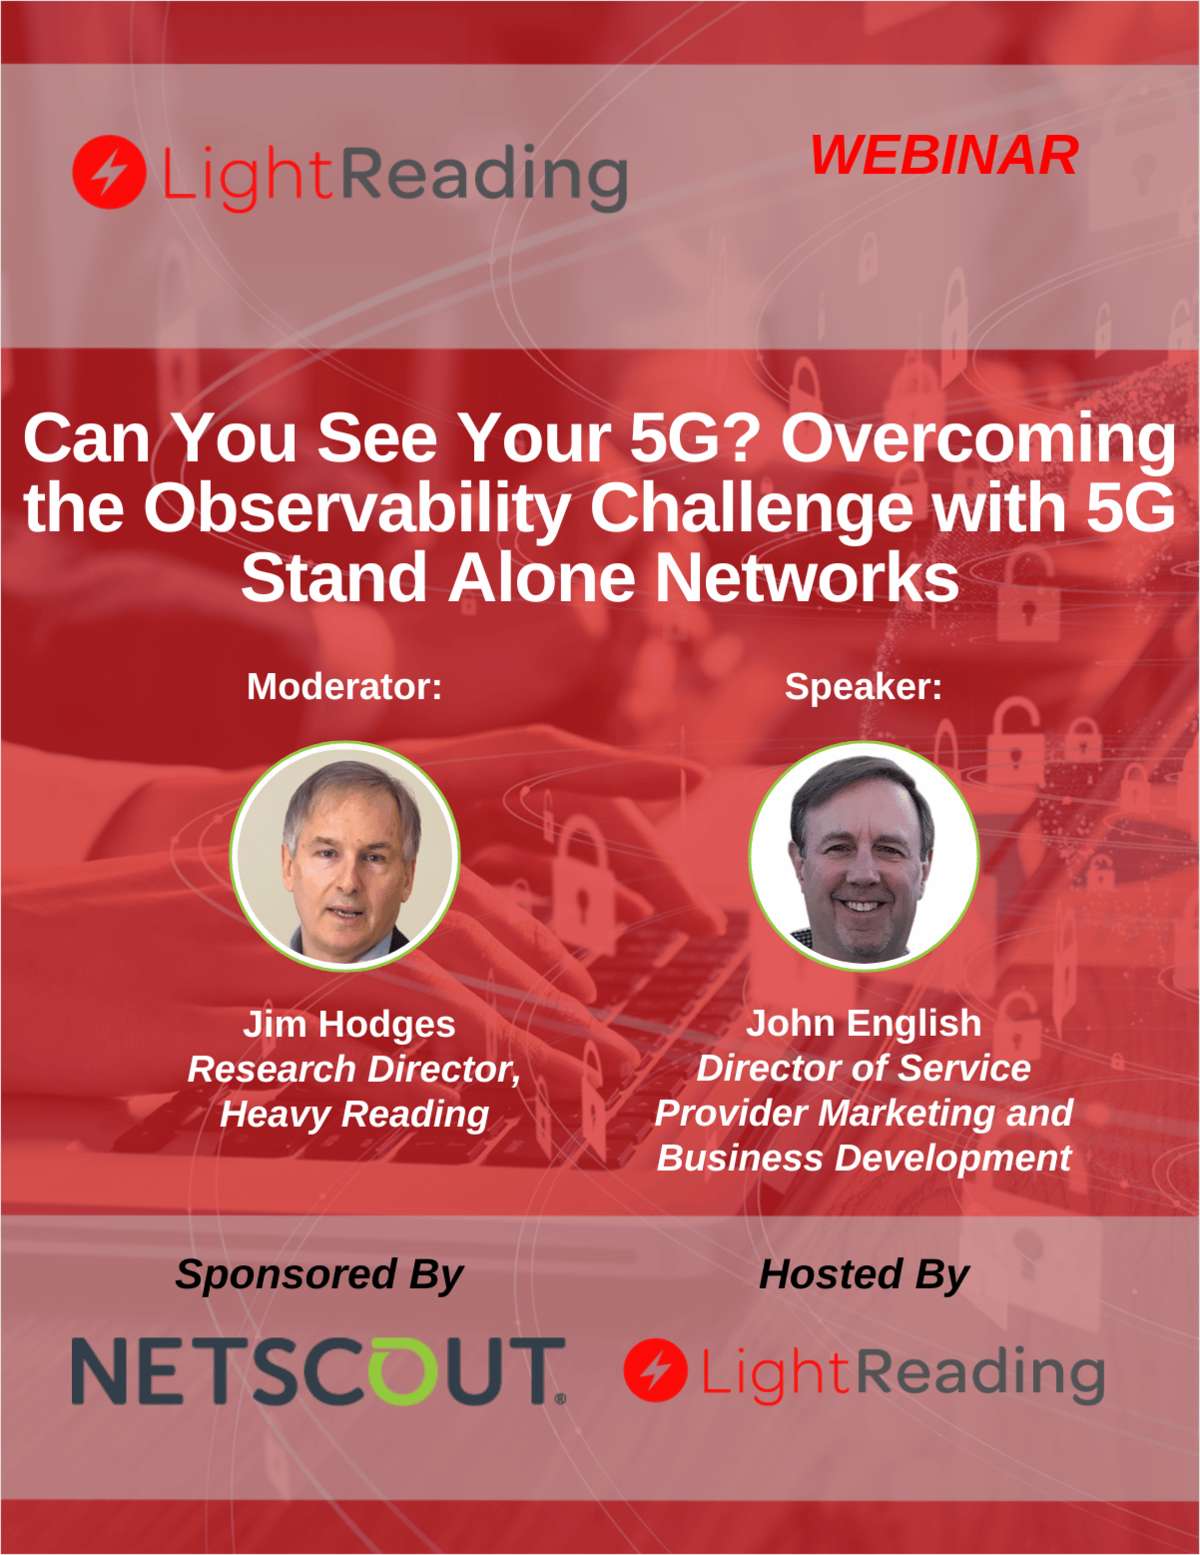 Can You See Your 5G? Overcoming the Observability Challenge with 5G Standalone Networks